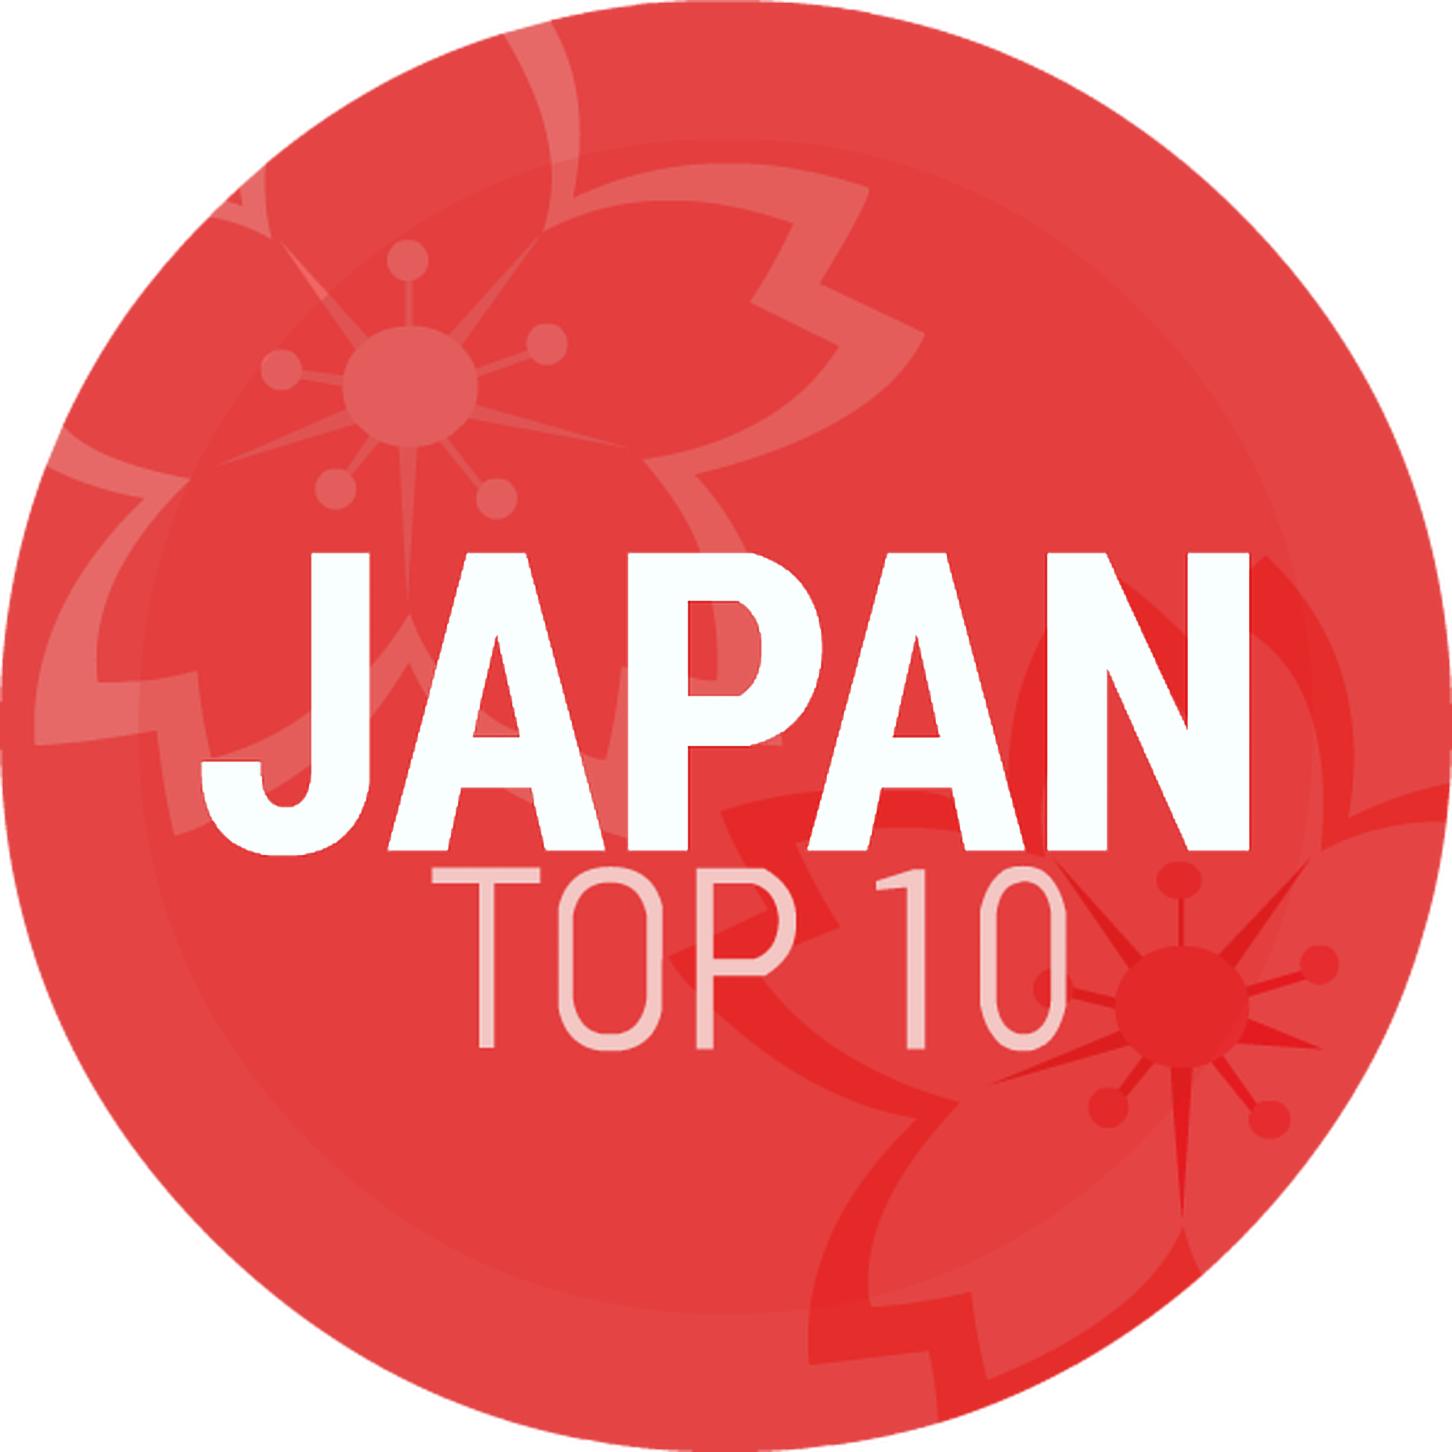 Episode 229: Japan Top 10 Mid/Late April 2018 Countdown